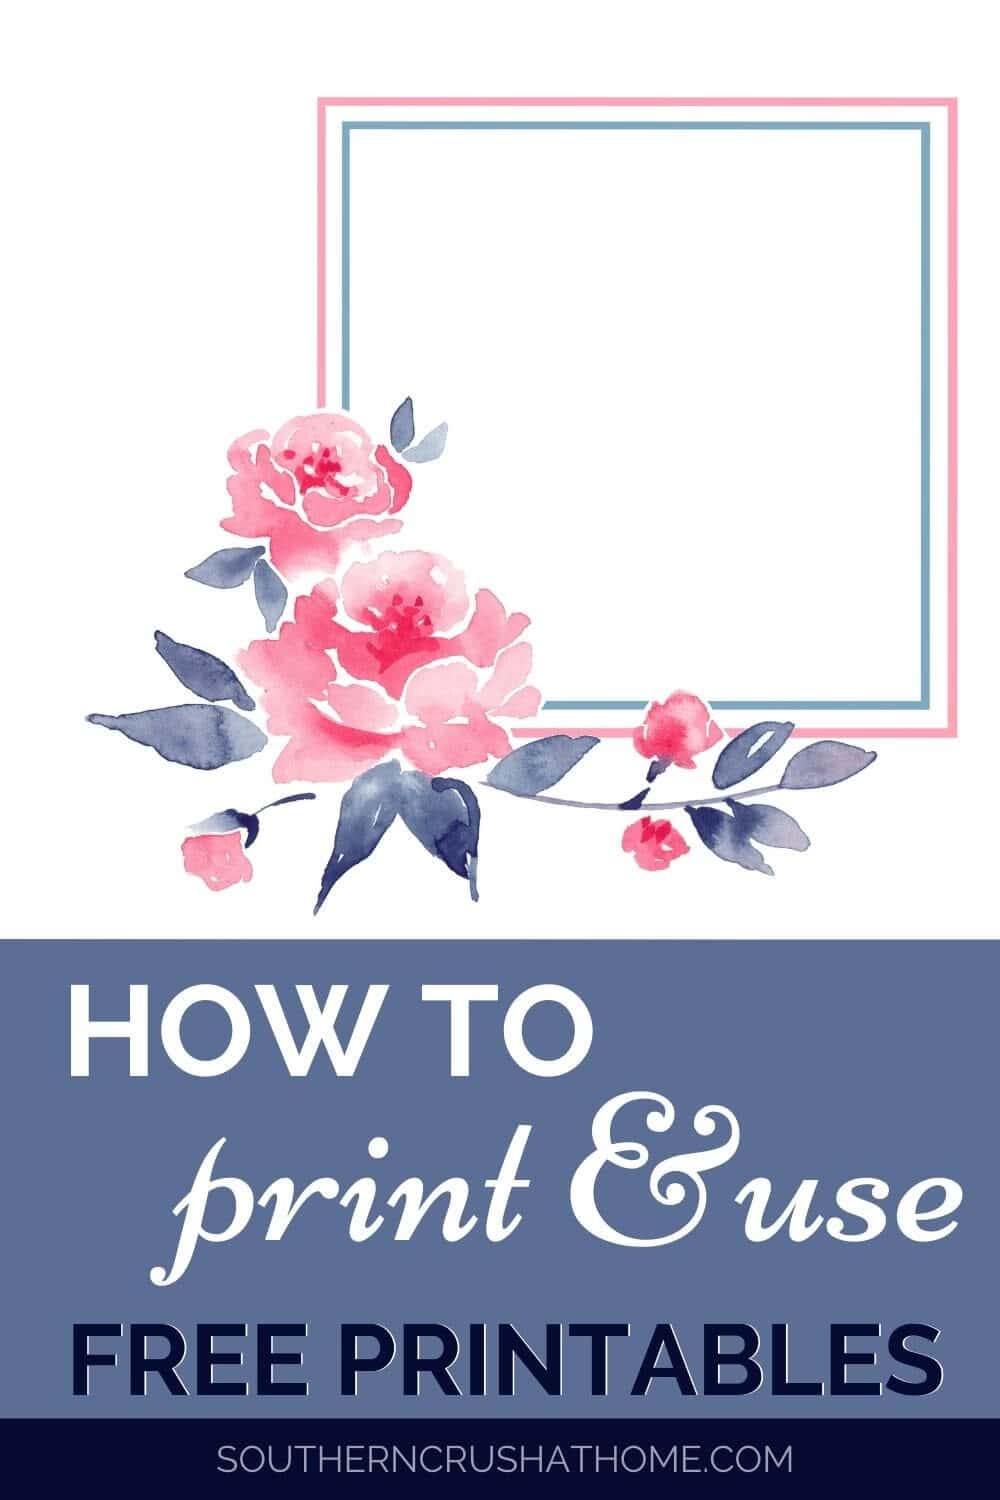 How to print & use FREE Printables